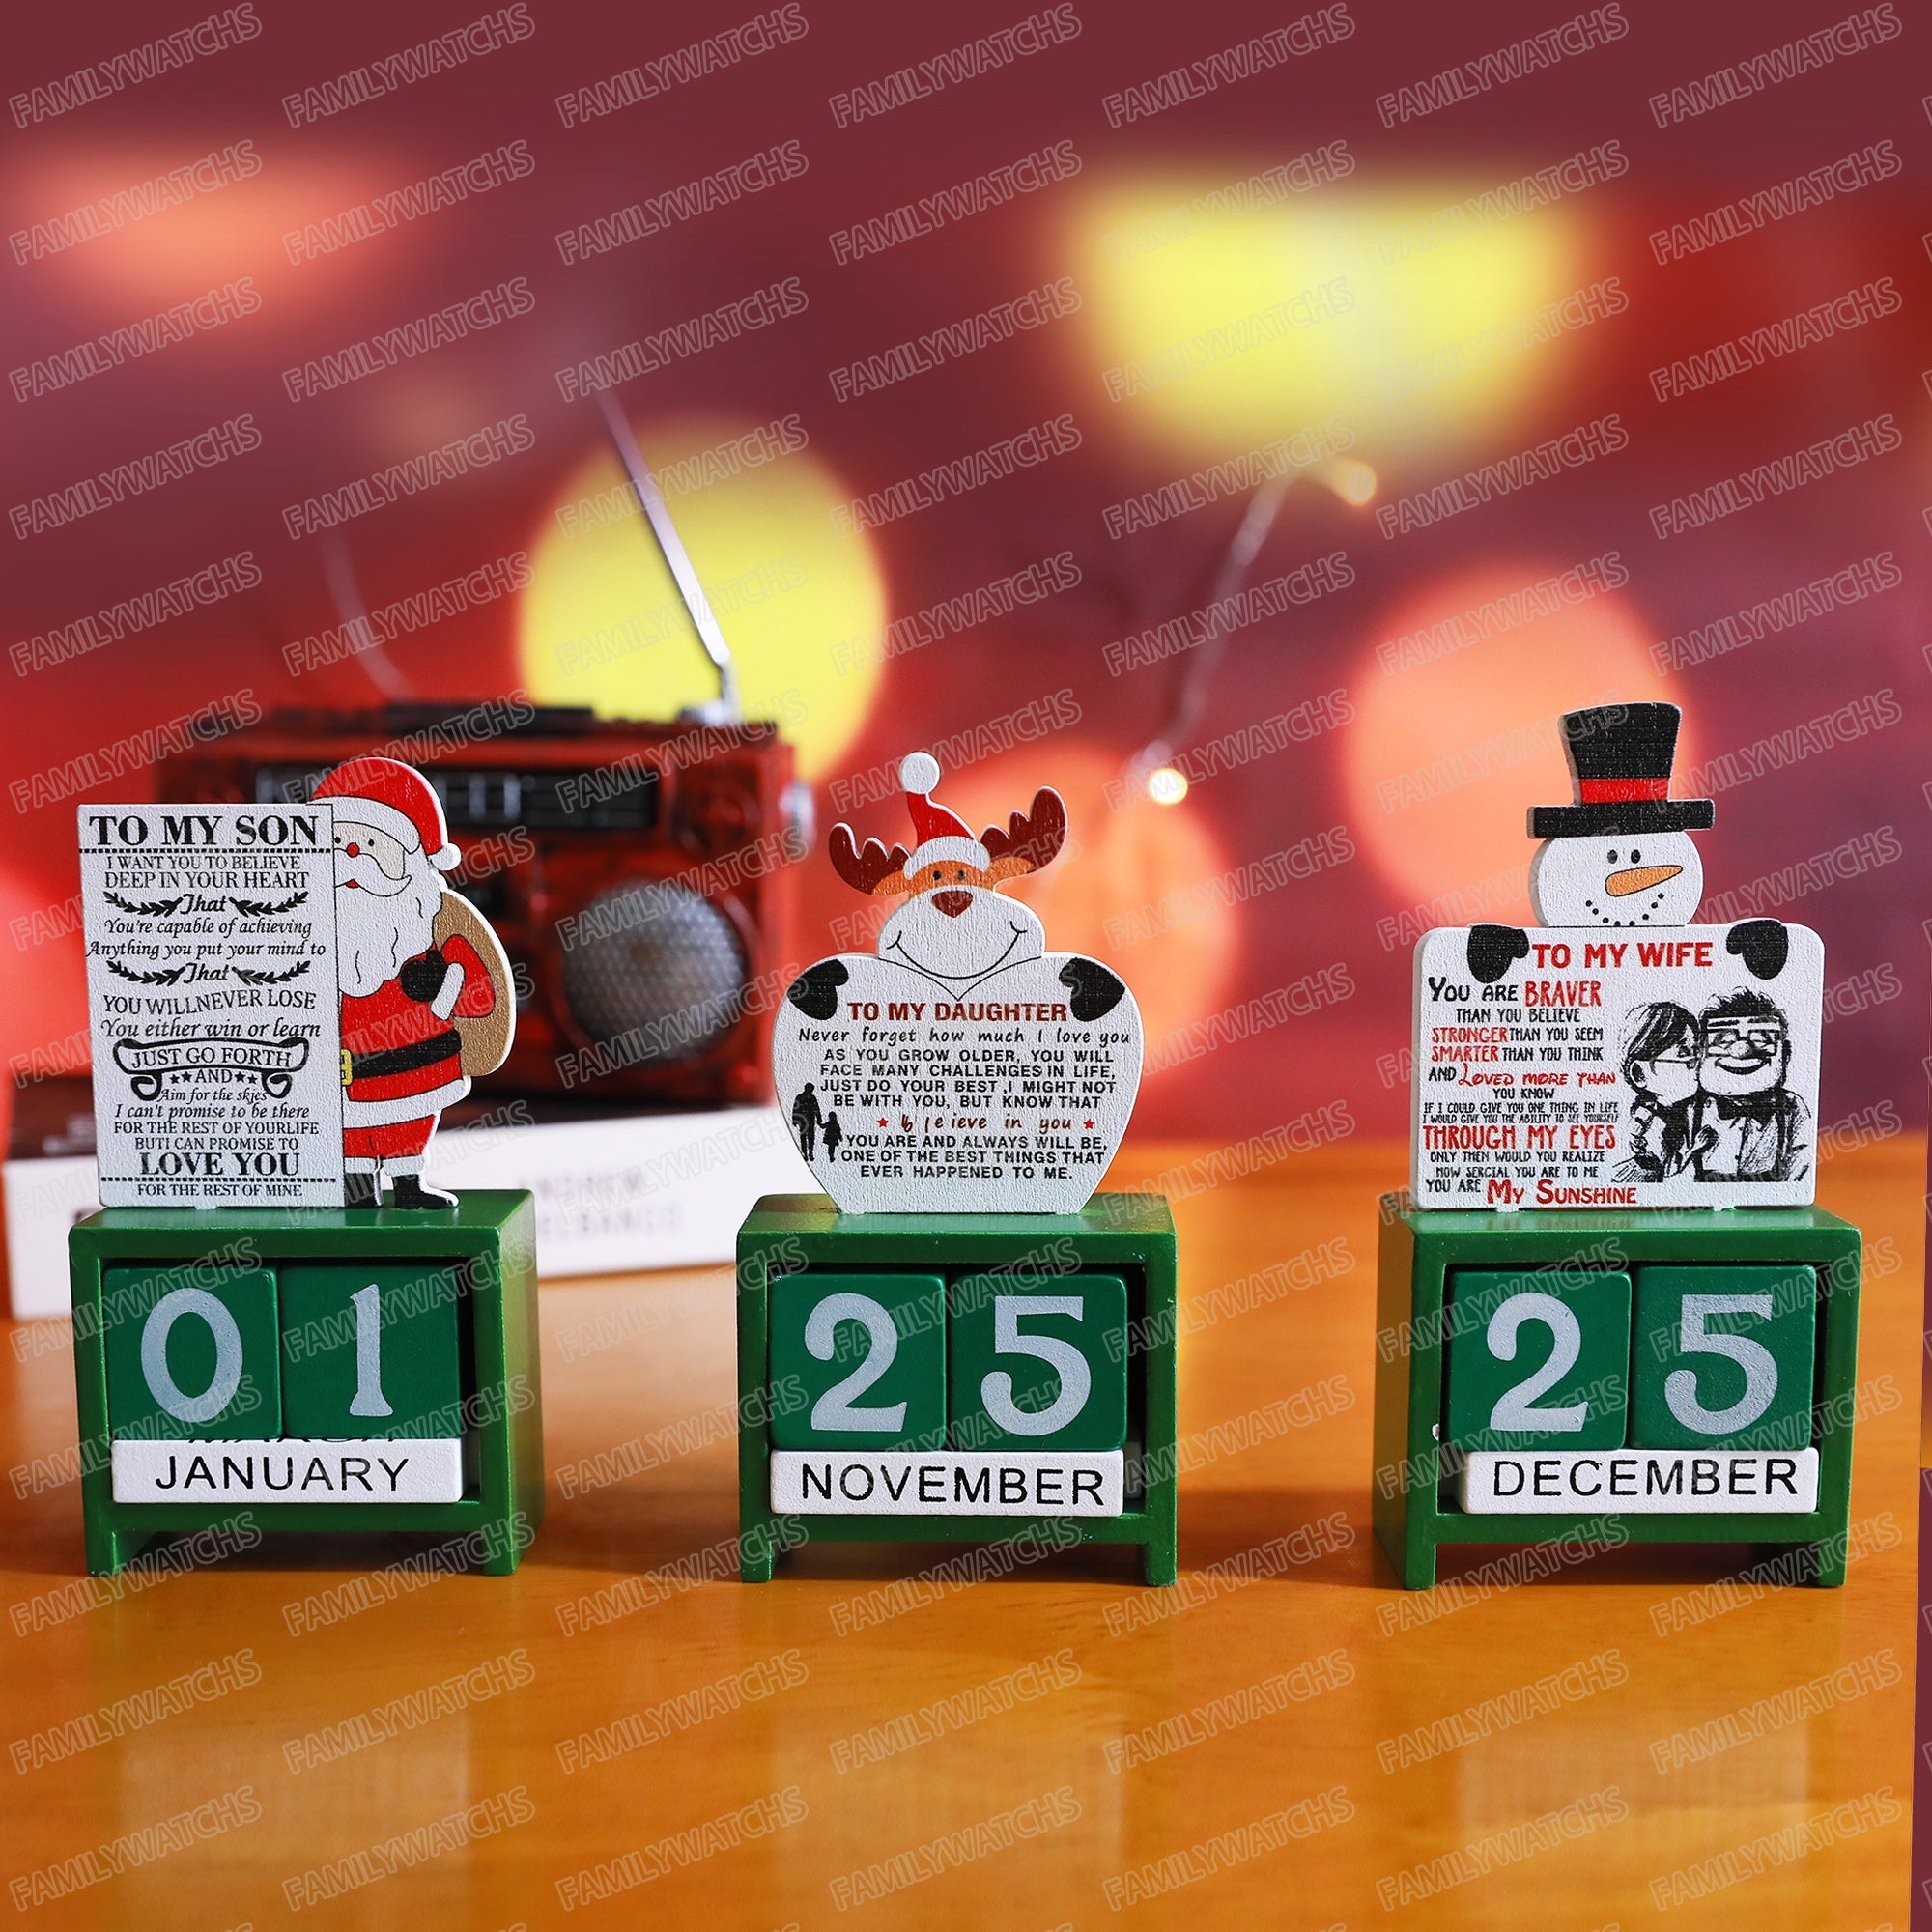 To My Wife - Christmas Advent Countdown Calendar Number Date Wooden Blocks Tabletop Desk Calendar Decoration for Home Office Decoration - Family Watchs